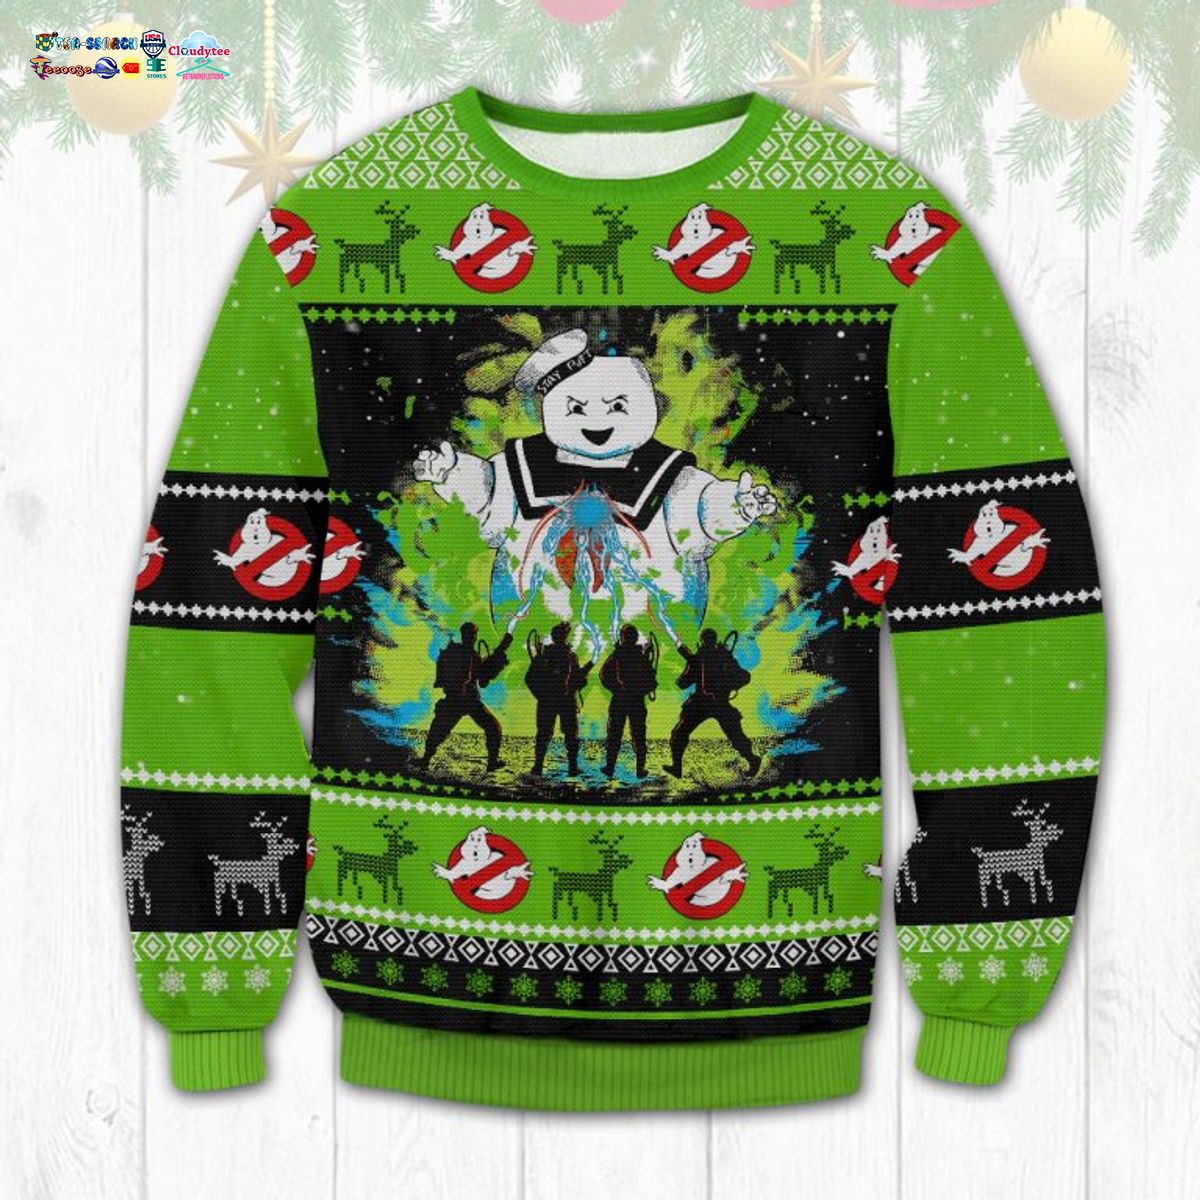 Ghostbusters Ugly Christmas Sweater - Such a charming picture.